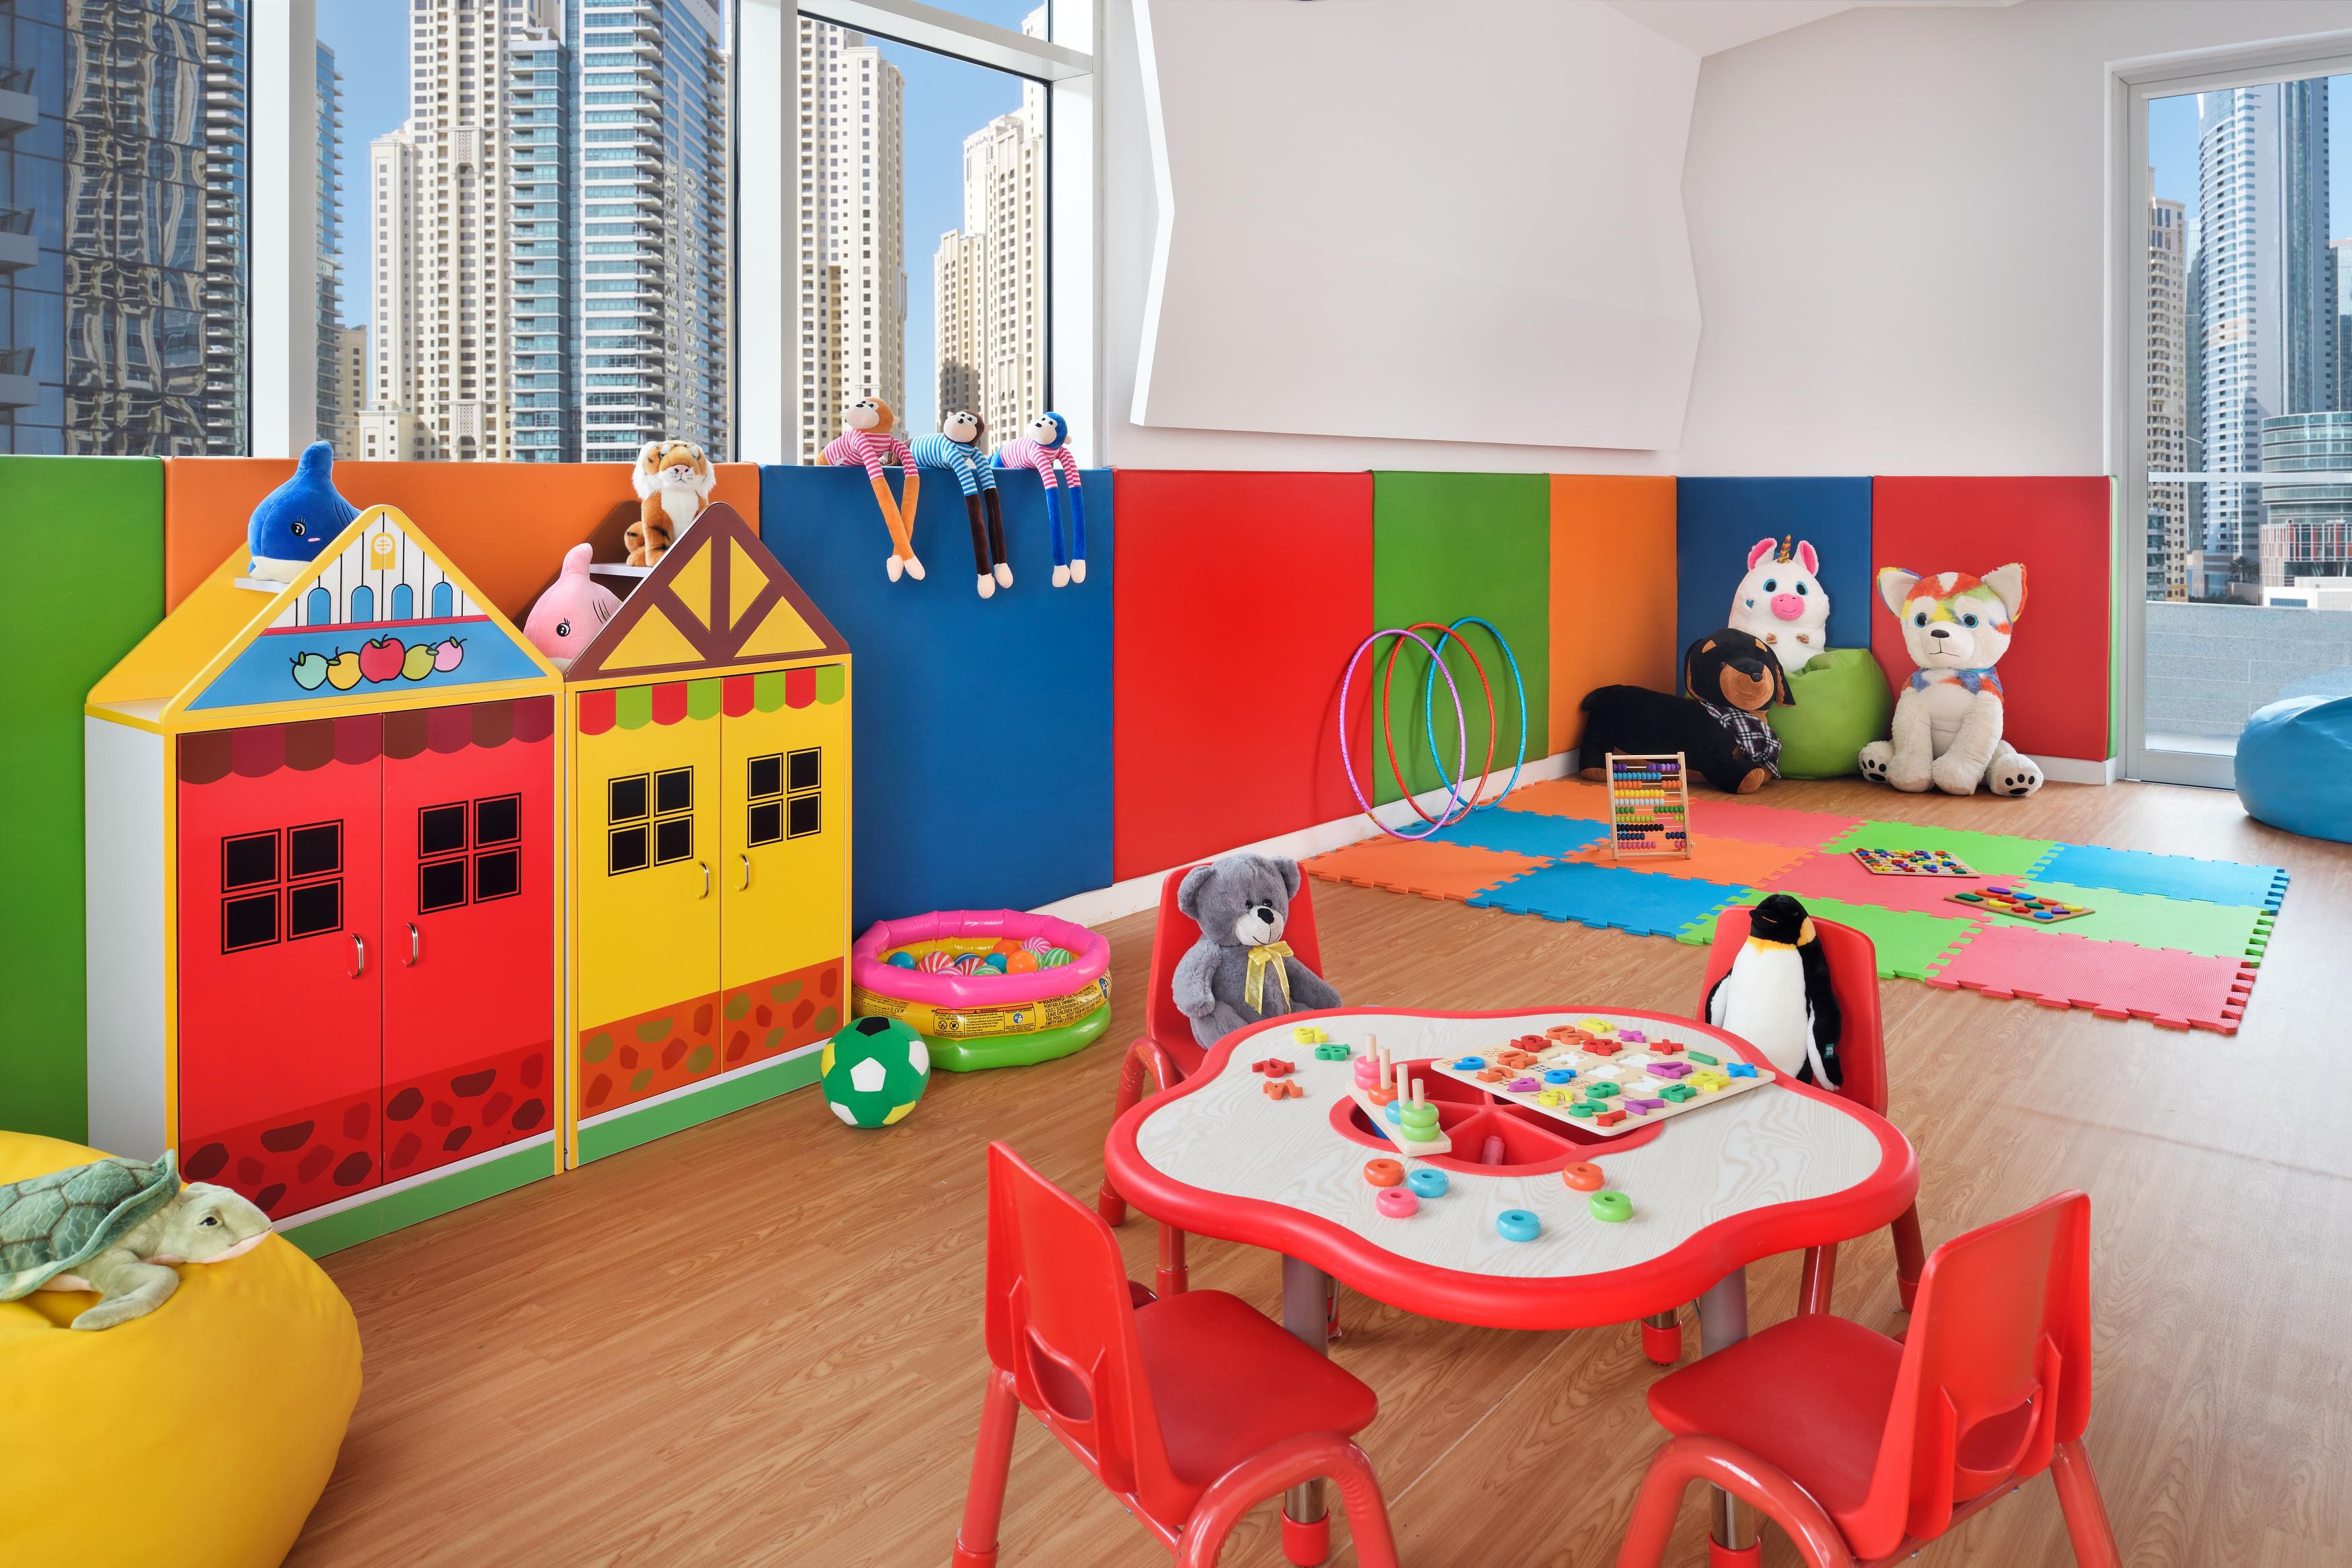 Our little guests will have great fun at our Kids Area 